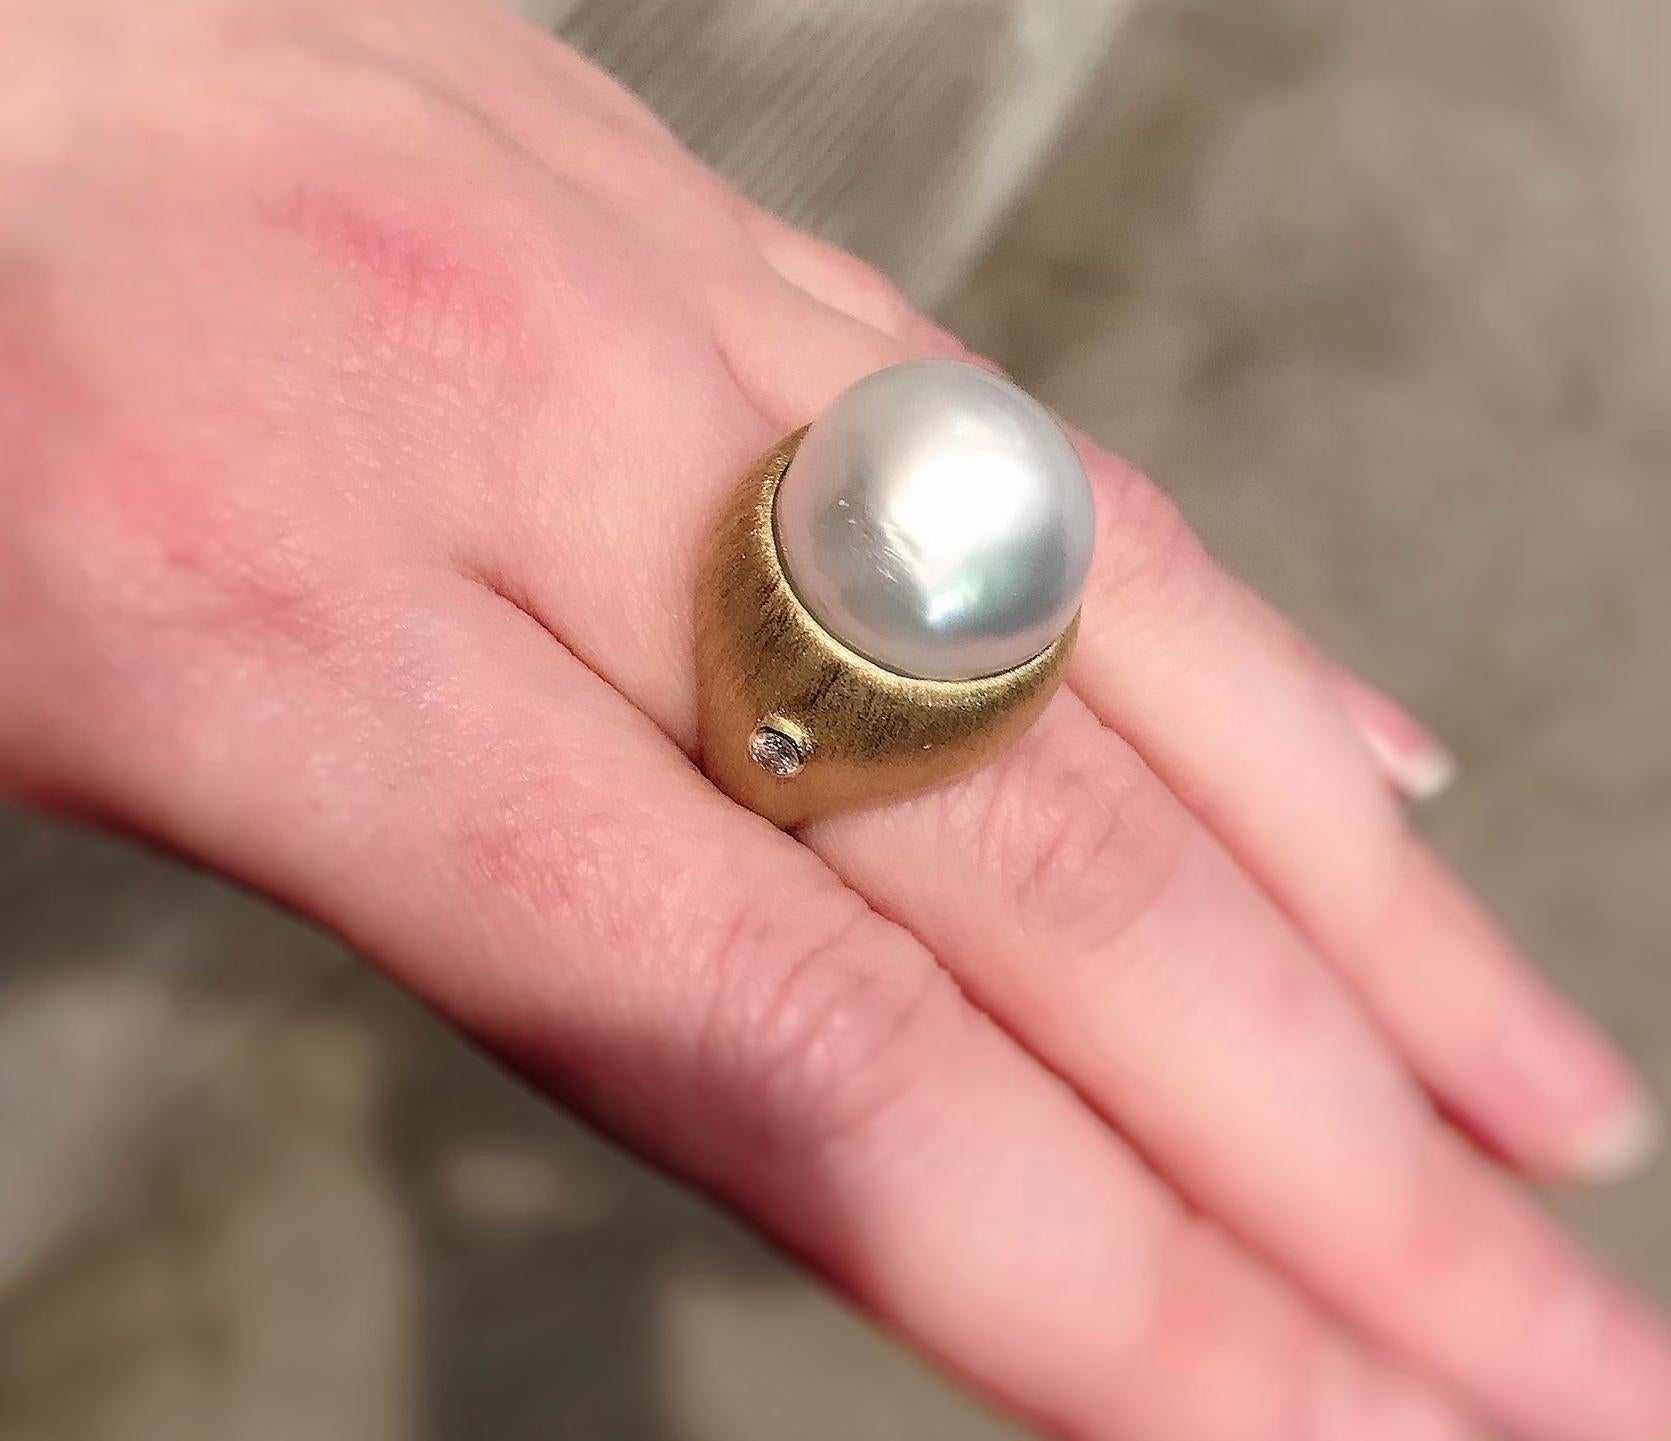 Women's Margot McKinney 18K Brushed Finish Gold Ring with South Sea Pearl and Diamonds